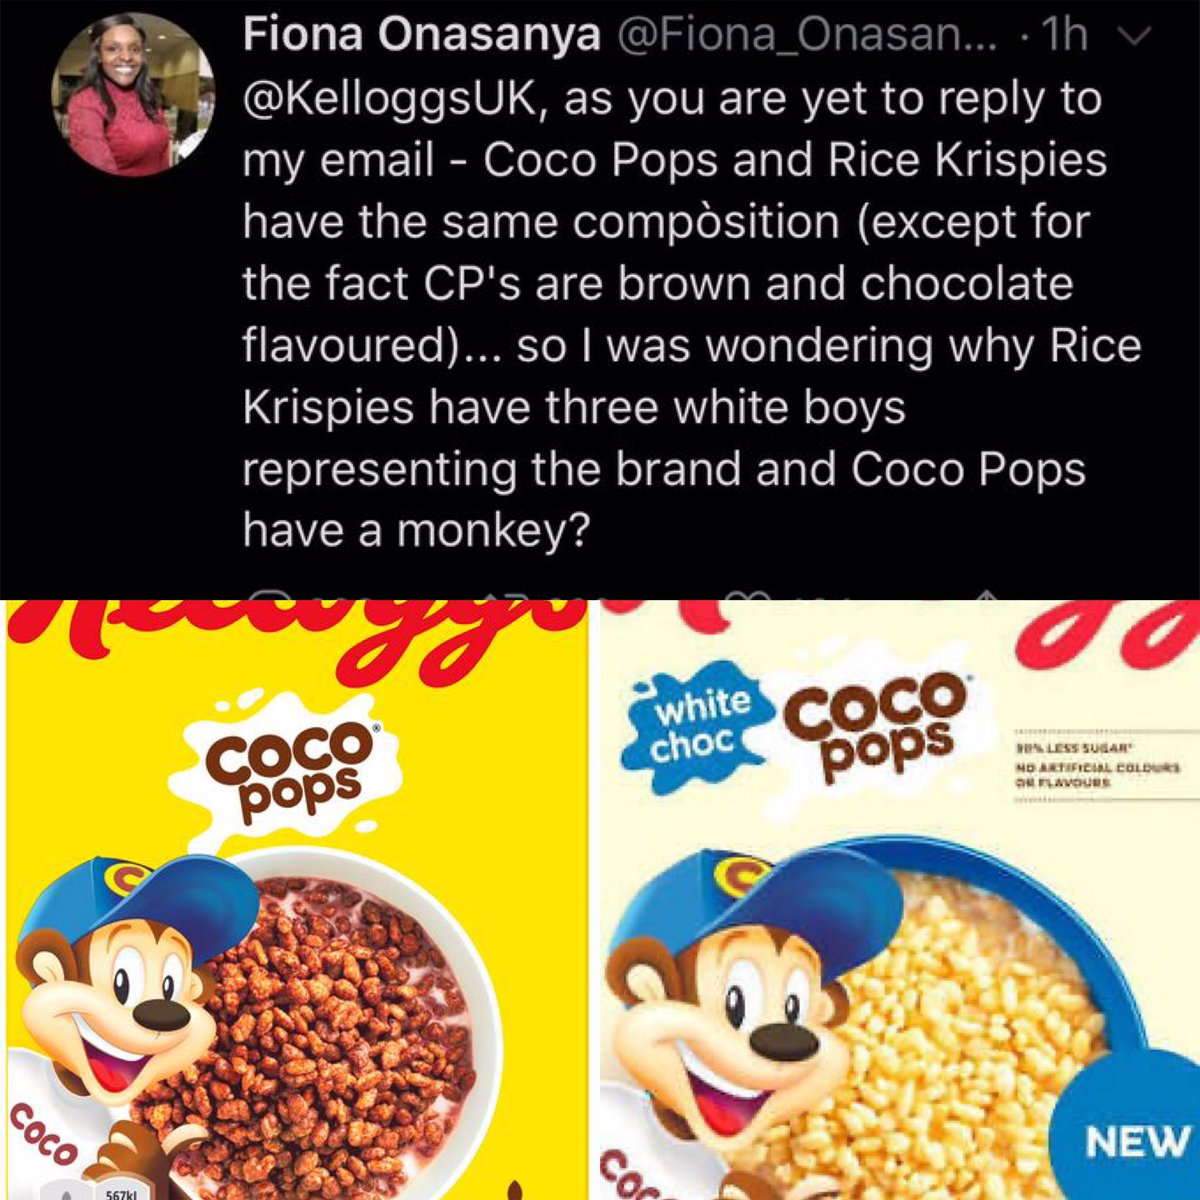 Is @Fiona_Onasanya an idiot? Yes, she is.

The monkey is the face of both milk choc Coco Pops AND white choc Coco Pops. It’s simply the face of Coco Pops, and the three boys are the face of Rice Krispies.

NOTHING to do with skin colour.